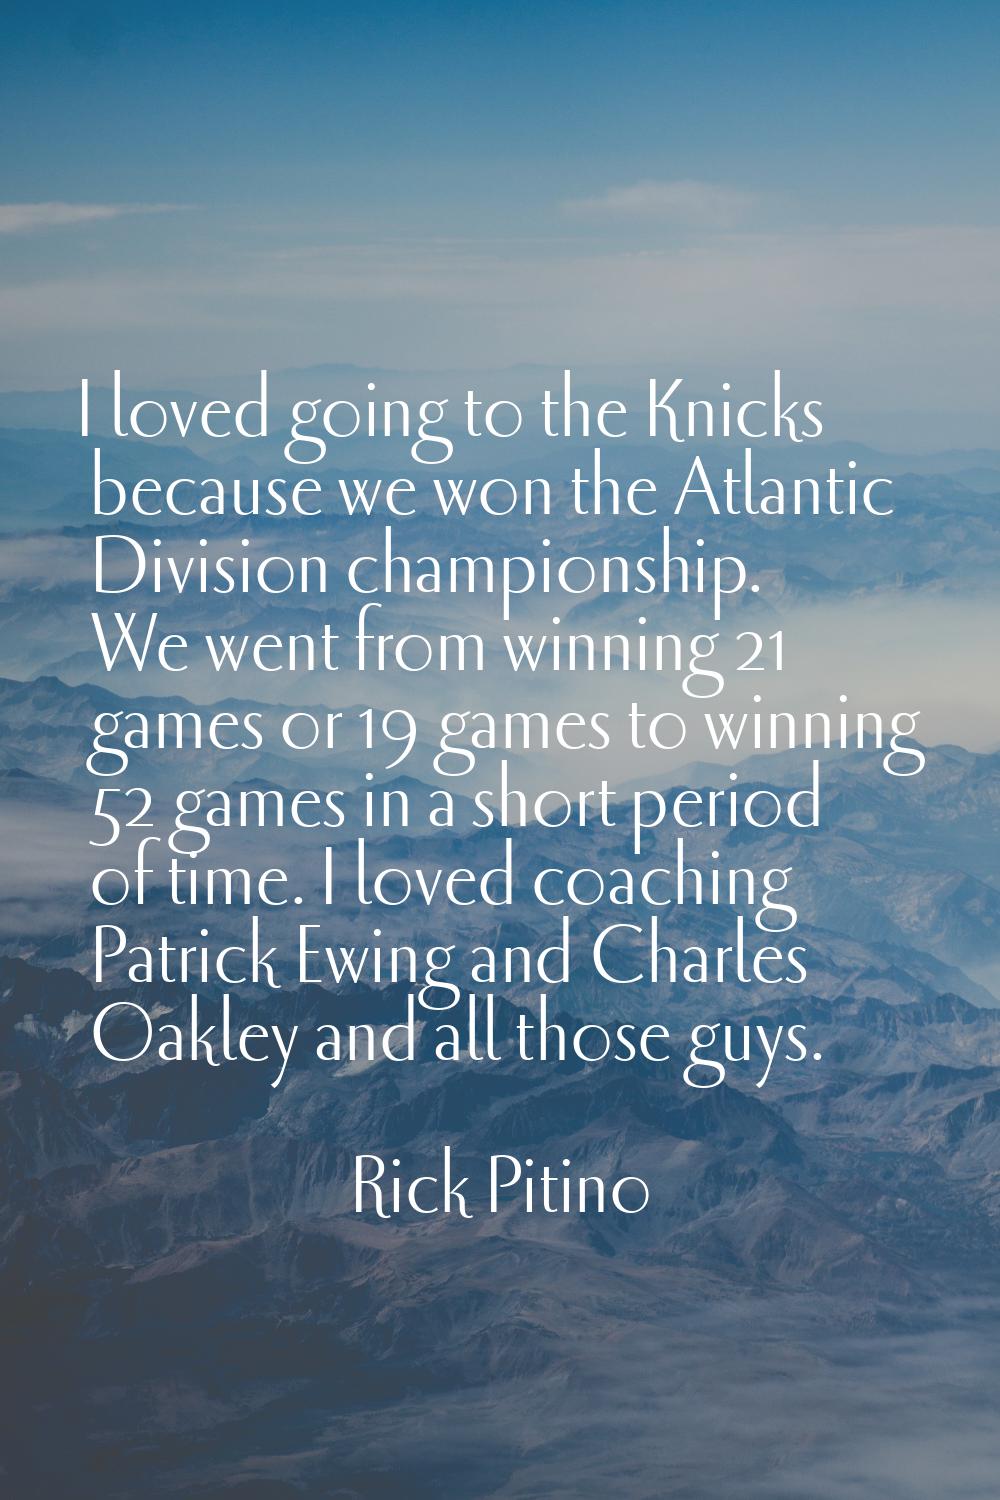 I loved going to the Knicks because we won the Atlantic Division championship. We went from winning